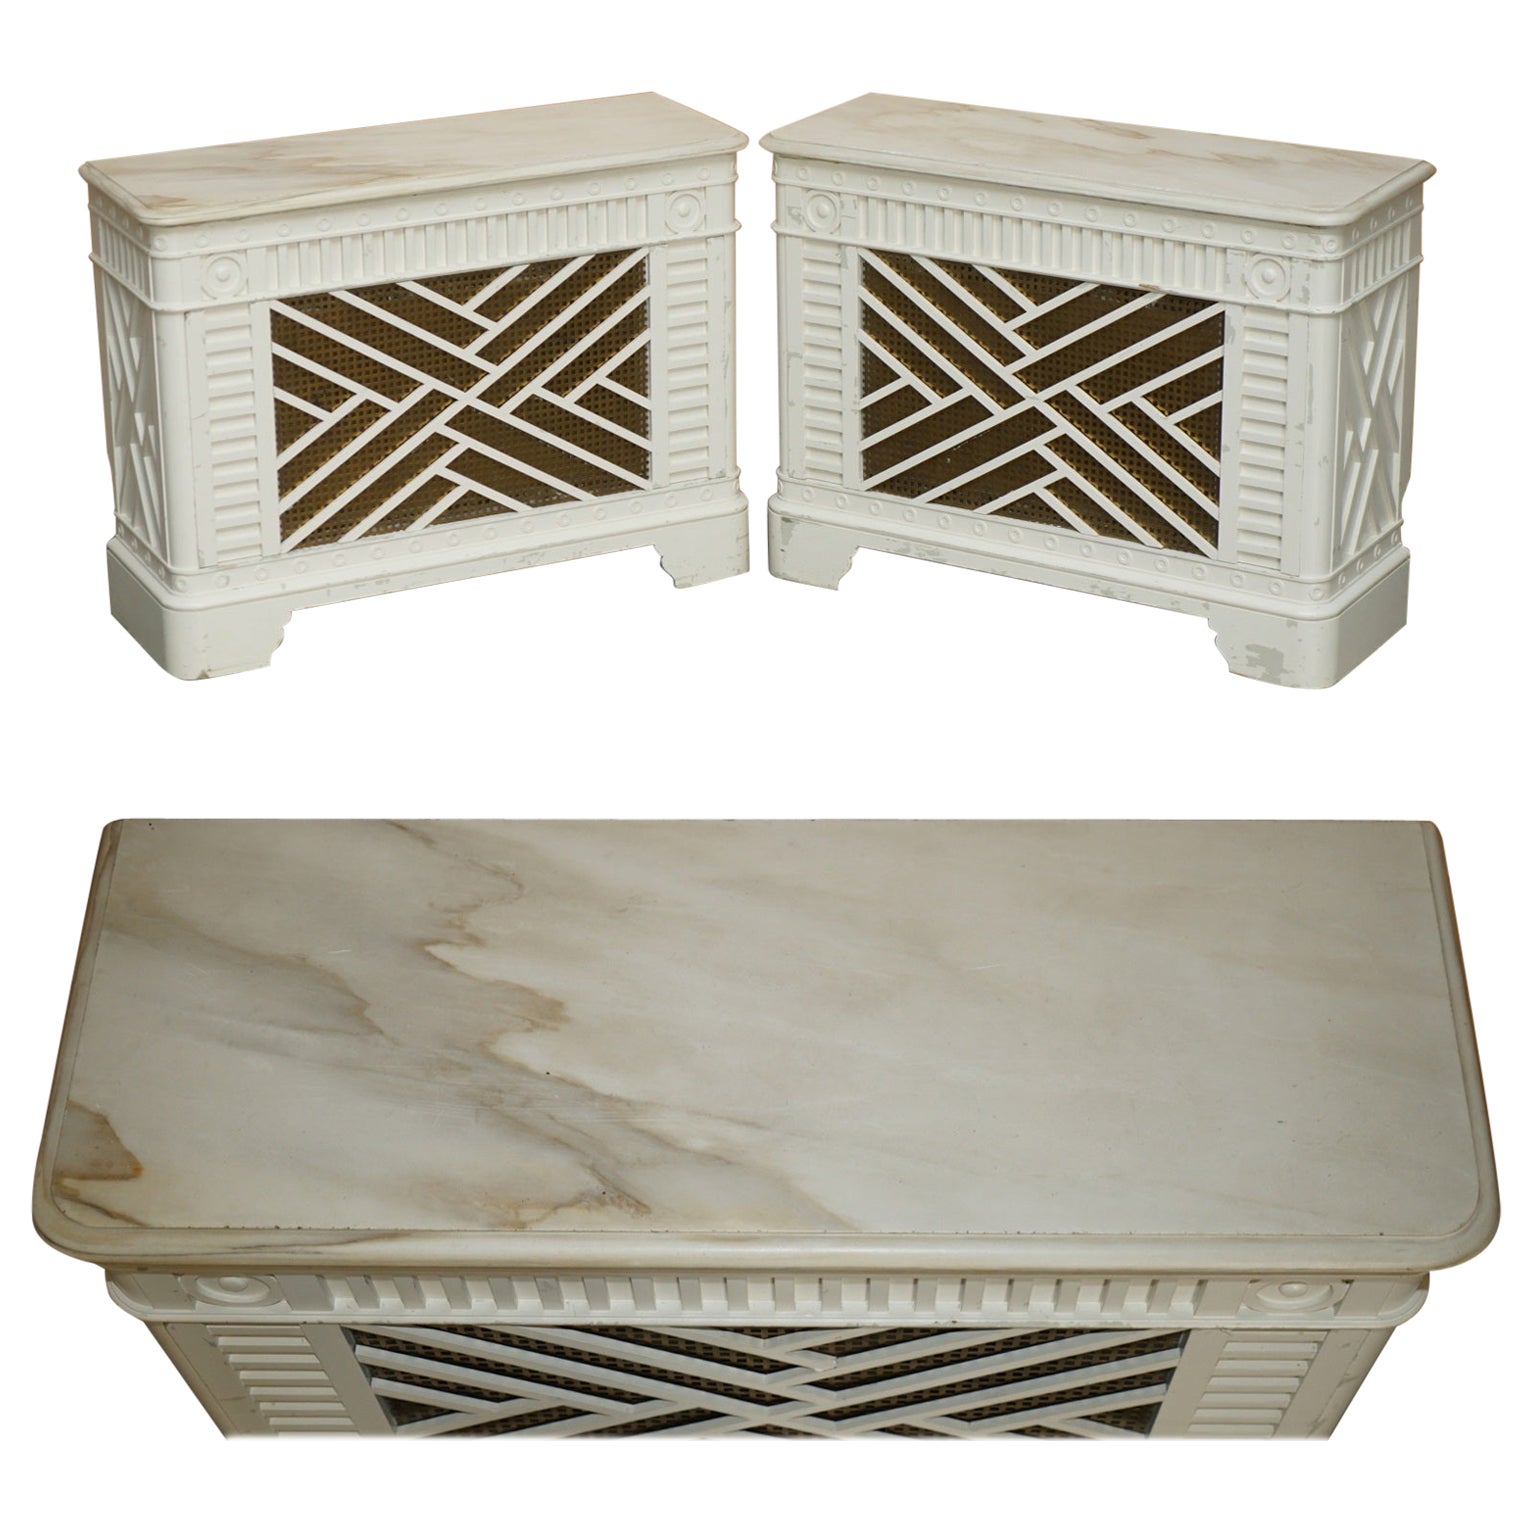 PAIR OF ViNTAGE ITALIAN CARRARA MARBLE TOPPED RADIATOR COVERS REMOVABLE FRONTS